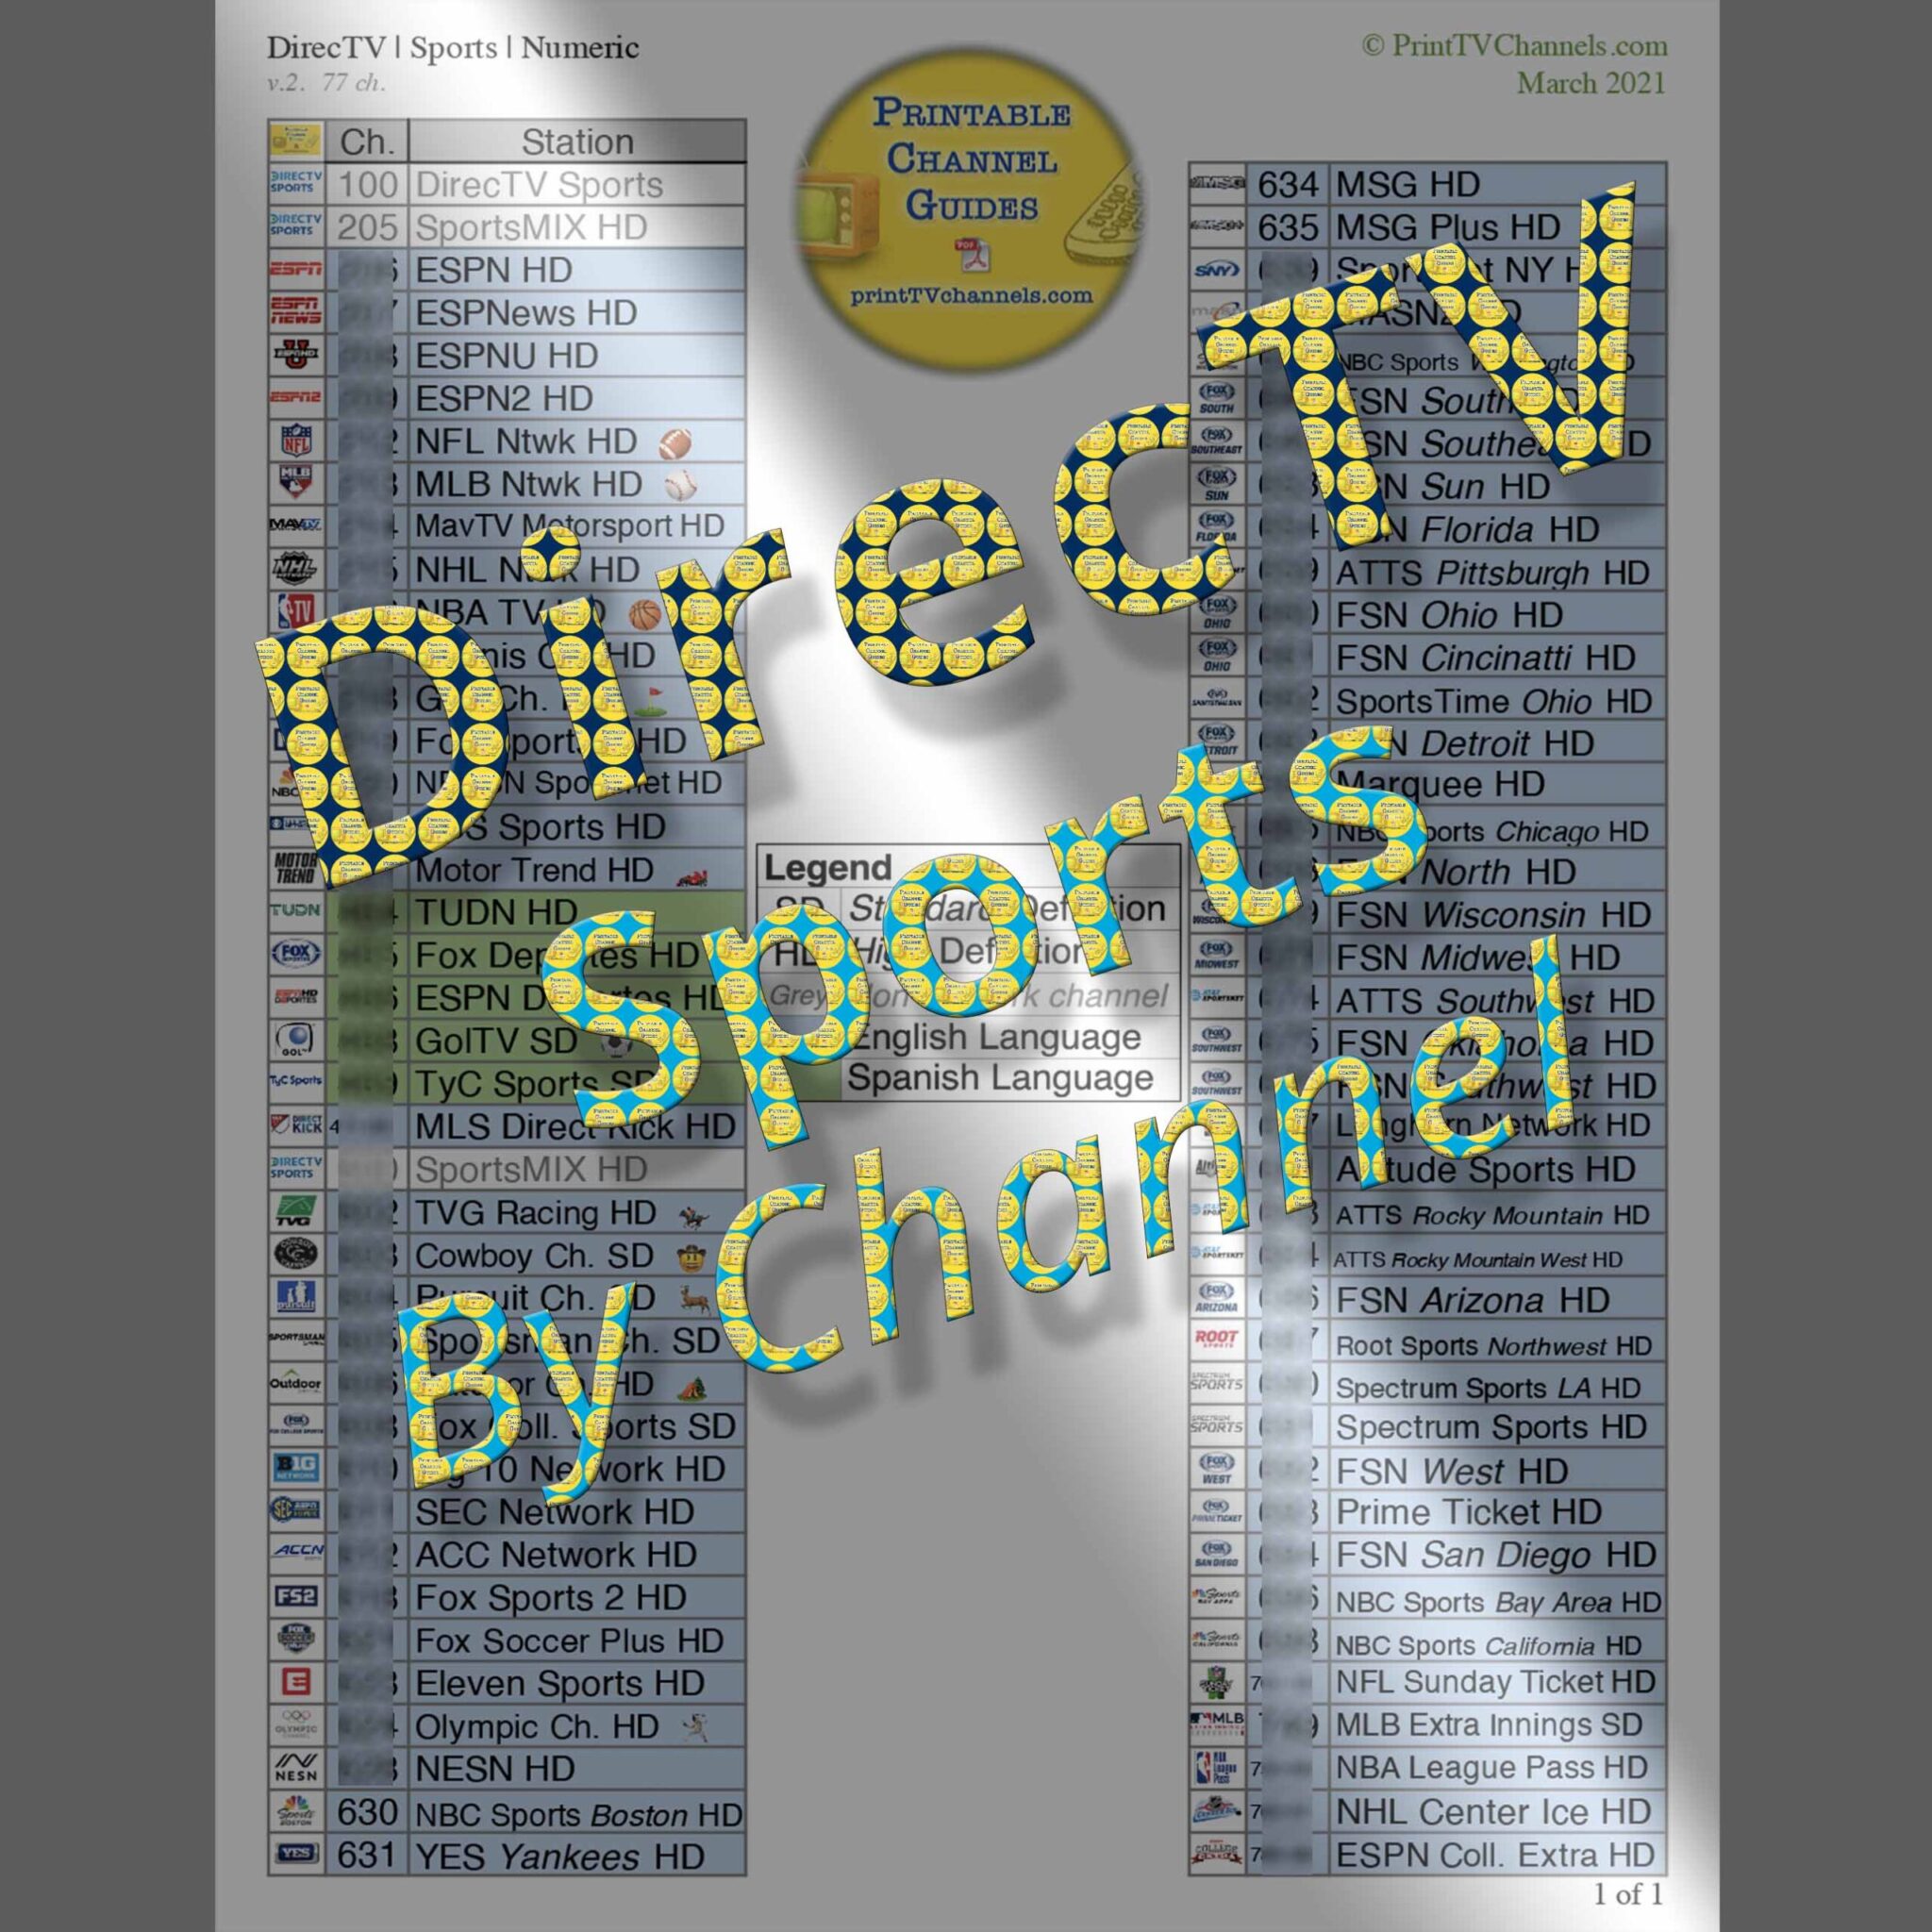 Preview Image: DirecTV Sports Channels (by channel number) - This channel guide lists all 77 unique TV sports stations available with DirecTV. Organized by channel number. Includes ESPN series, a ton of Fox sports, Golf Channel, NBC Sports, CBS Sports and all the major sporting networks (NBA, NFL, NHL, MLB and MLS Direct Kick). Most stations are HD quality. Less commonly known channels include Eleven Sports (British), Longhorn Network, MASN, NESN, Outdoor Channel, TUDN and TyC sports for example.